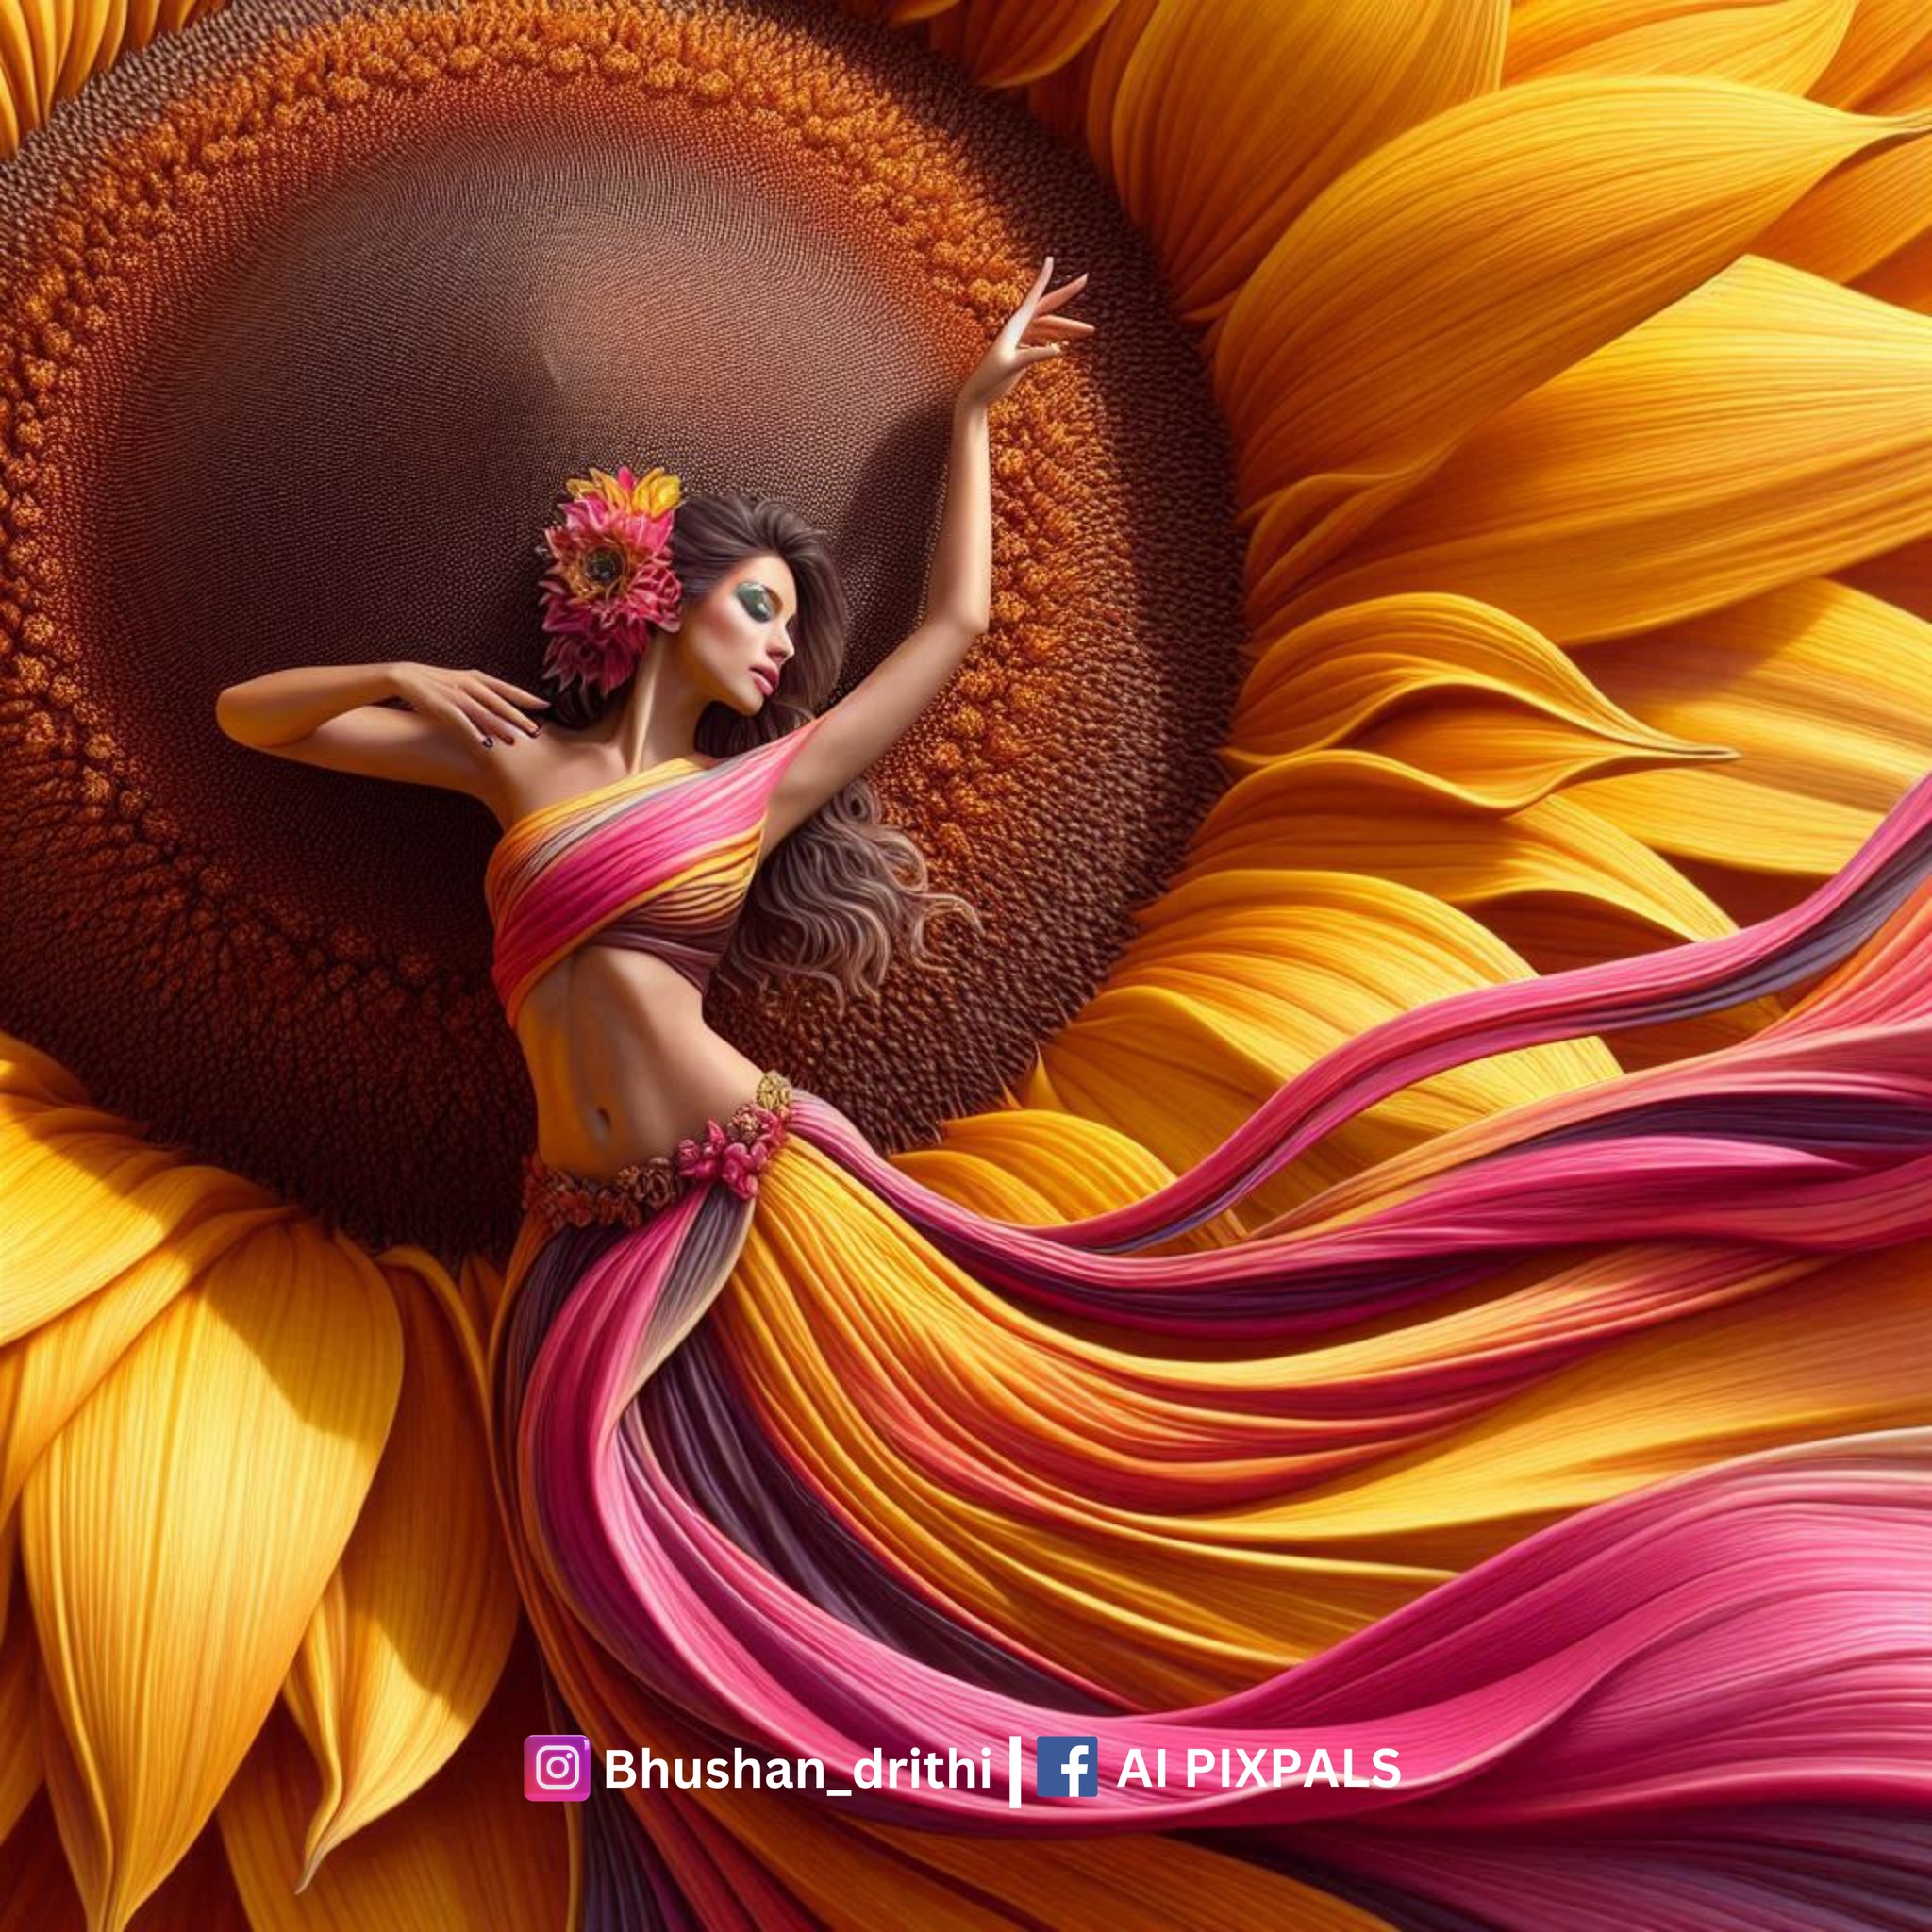 Dancing through life with the grace of a sunflower  Embracing every moment with...